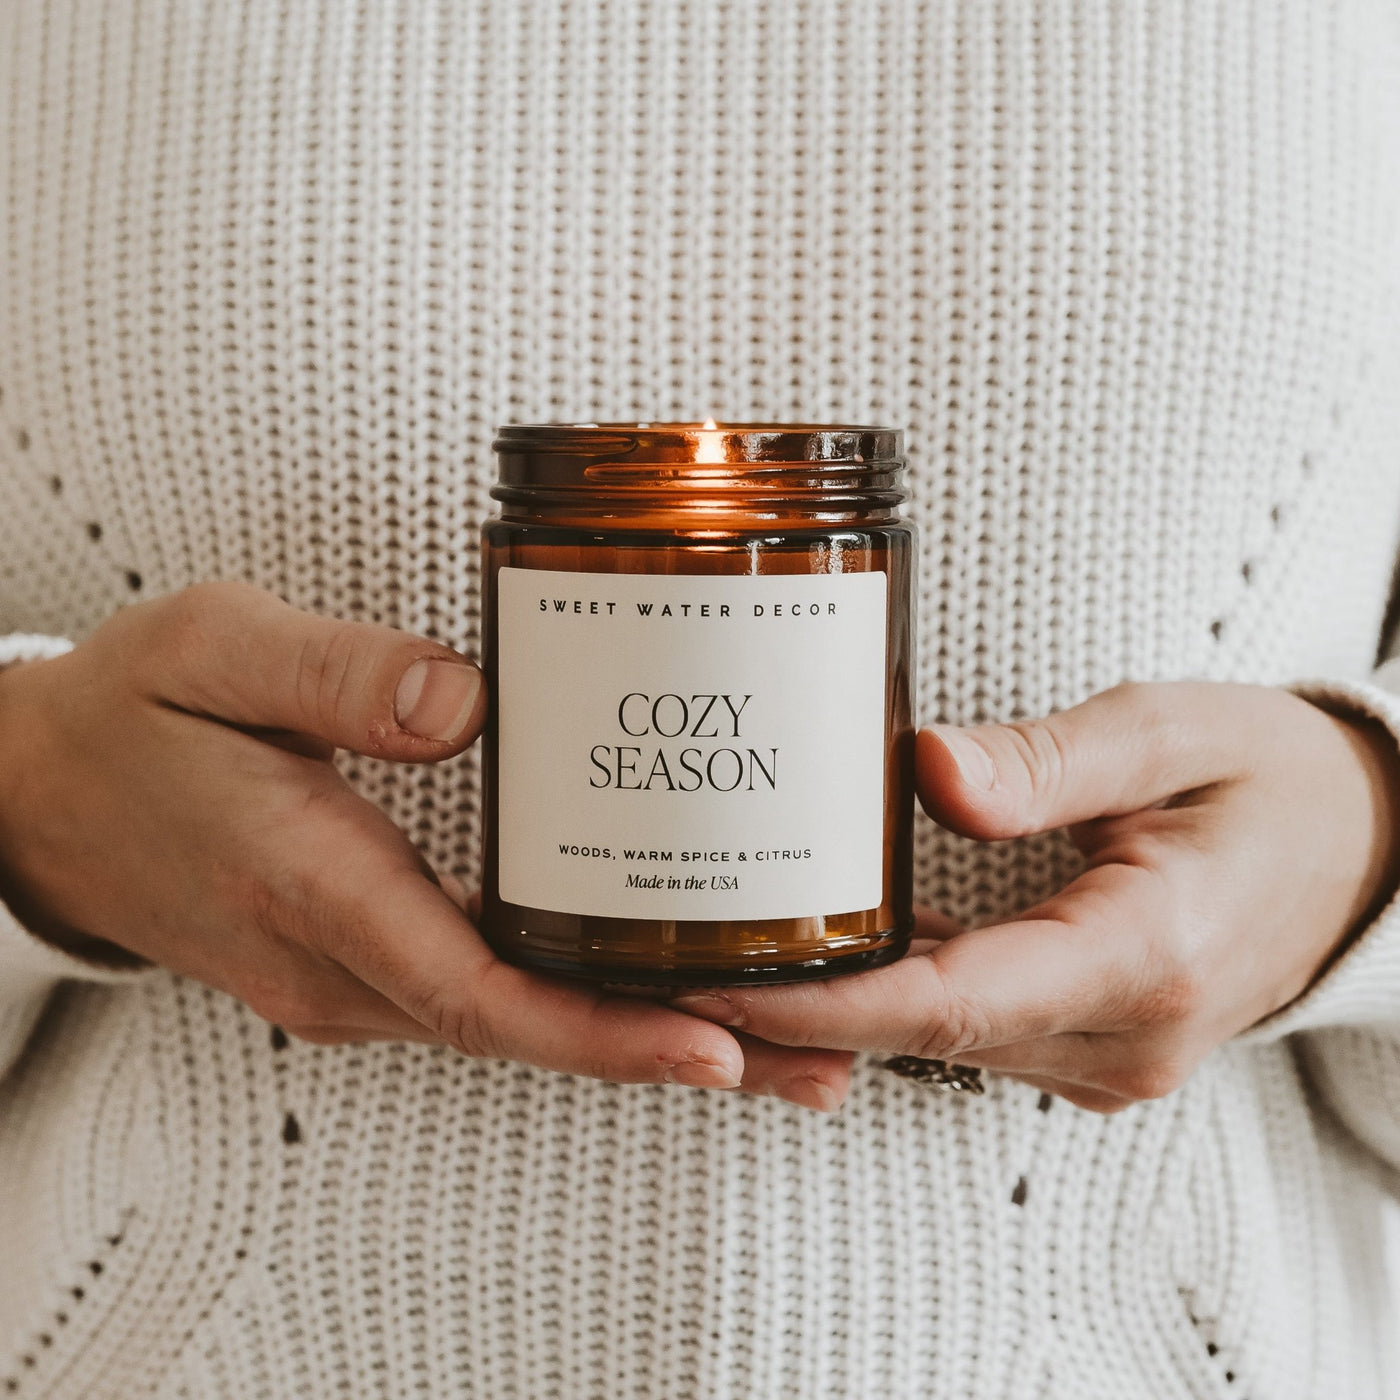 Cozy Season Soy Candle - Amber Jar - 9 oz - Sweet Water Decor - Candles